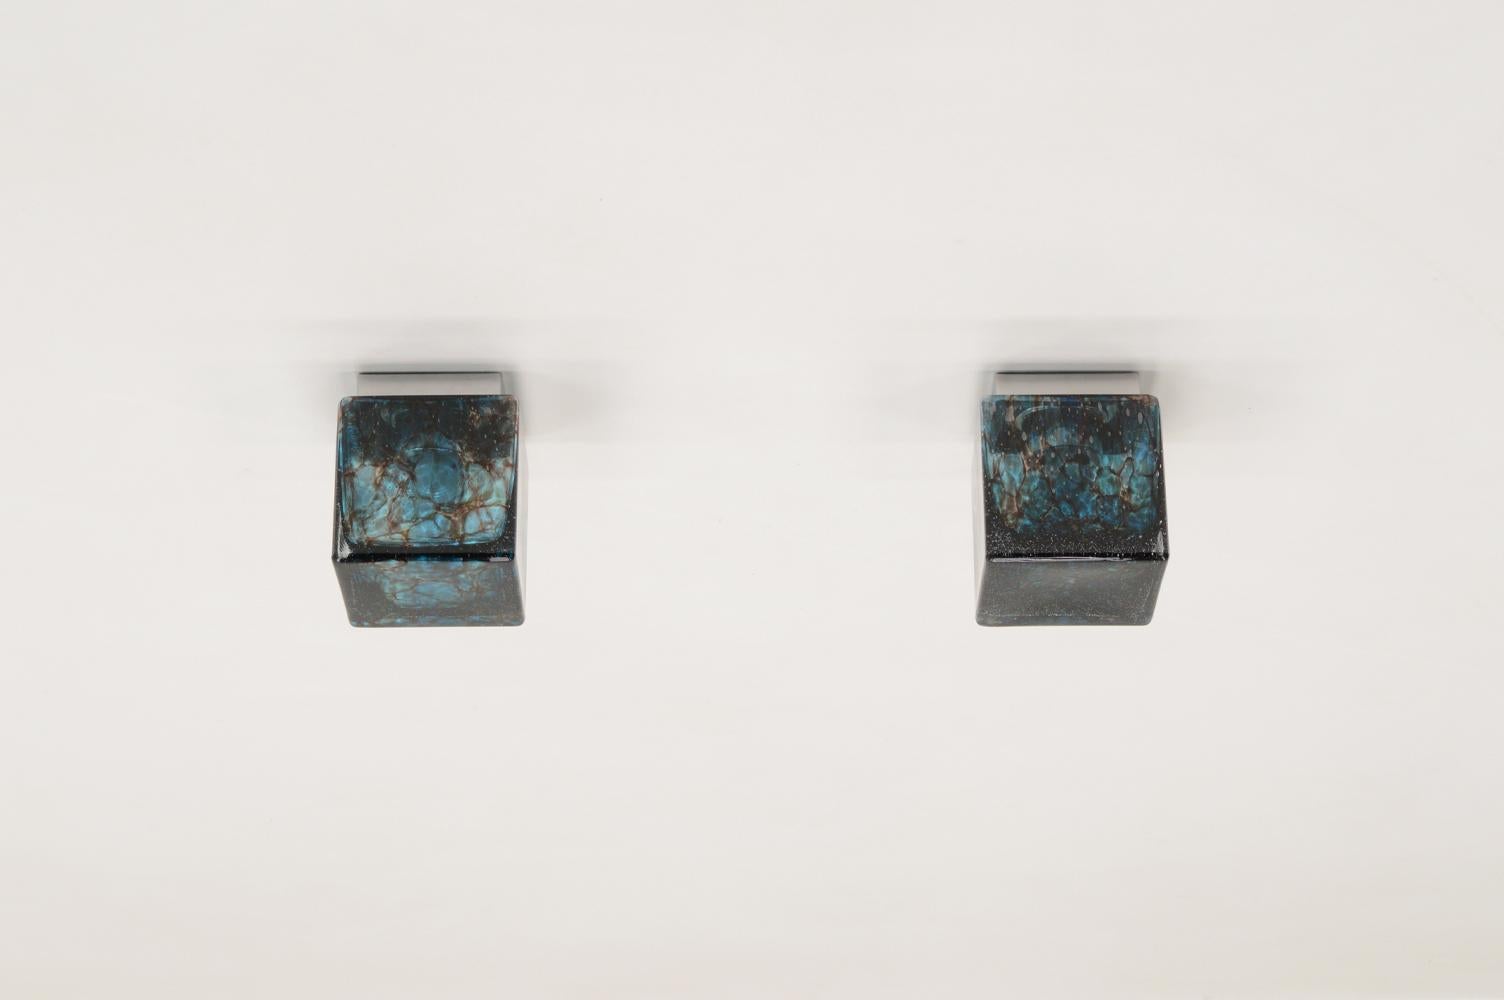 Set of 2 Cube flush mount ceiling lights by Glashütte Limburg, Germany 1970s. Thick blue glass cubes with bubbles and dark veins. Chrome mount that holds a E27 bulb. This is a rare set. Marked with Glashütte Limburg logo on the inside. In very good